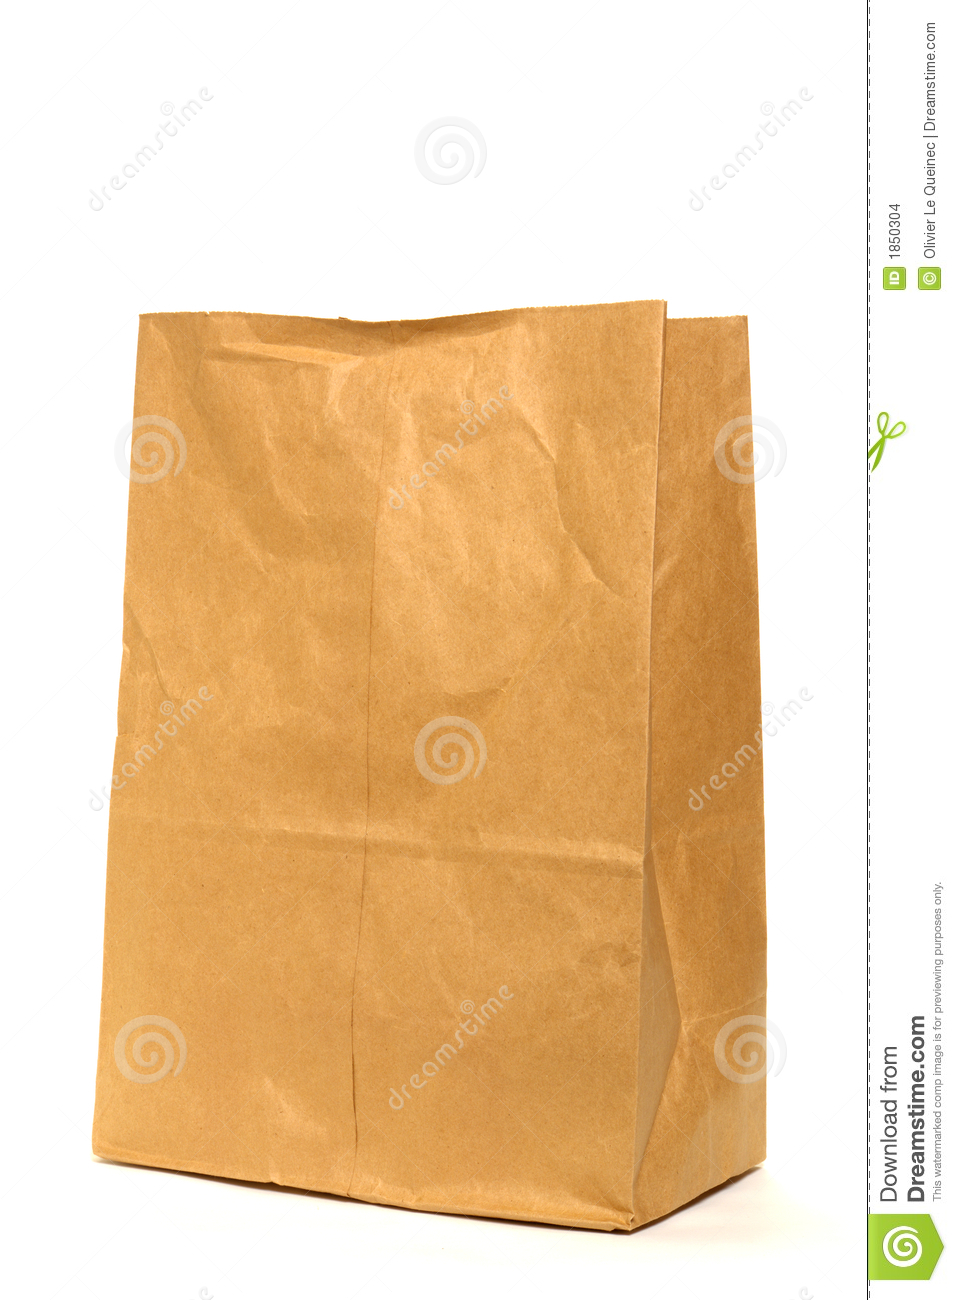 Paper Bag Clip Art Brown Recycled Paper Grocery